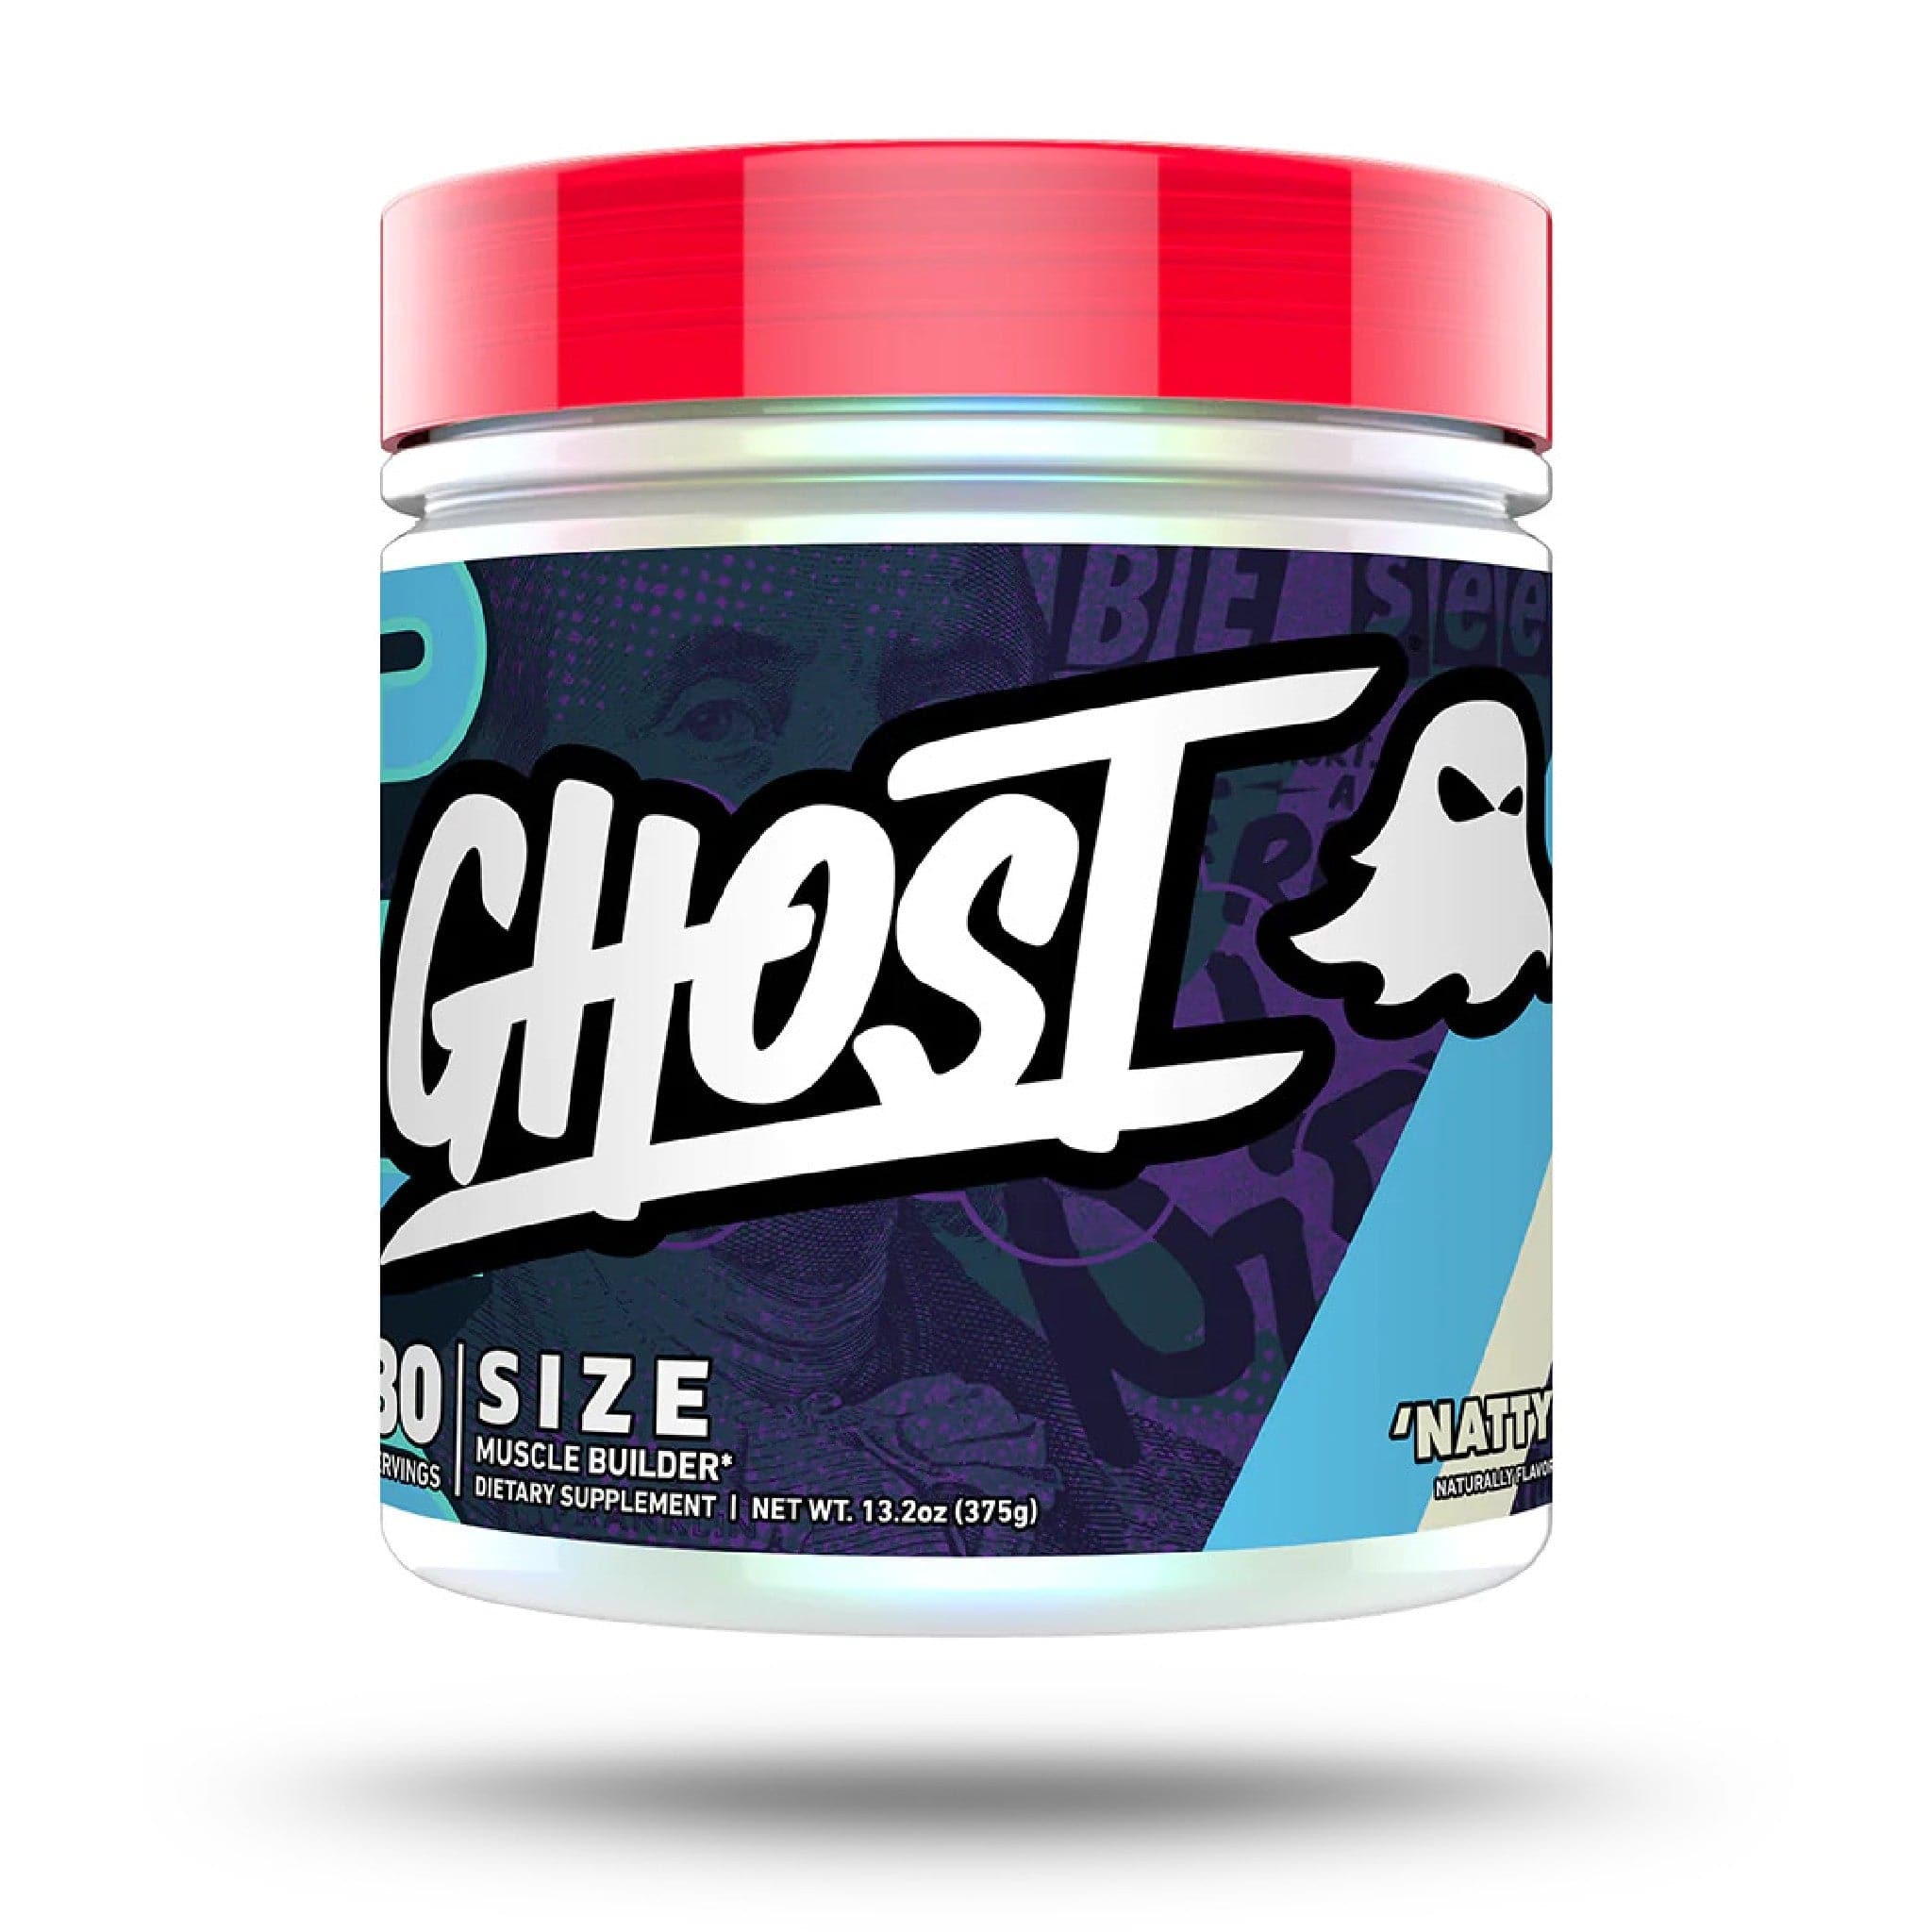 GHOST Taille 30 portions